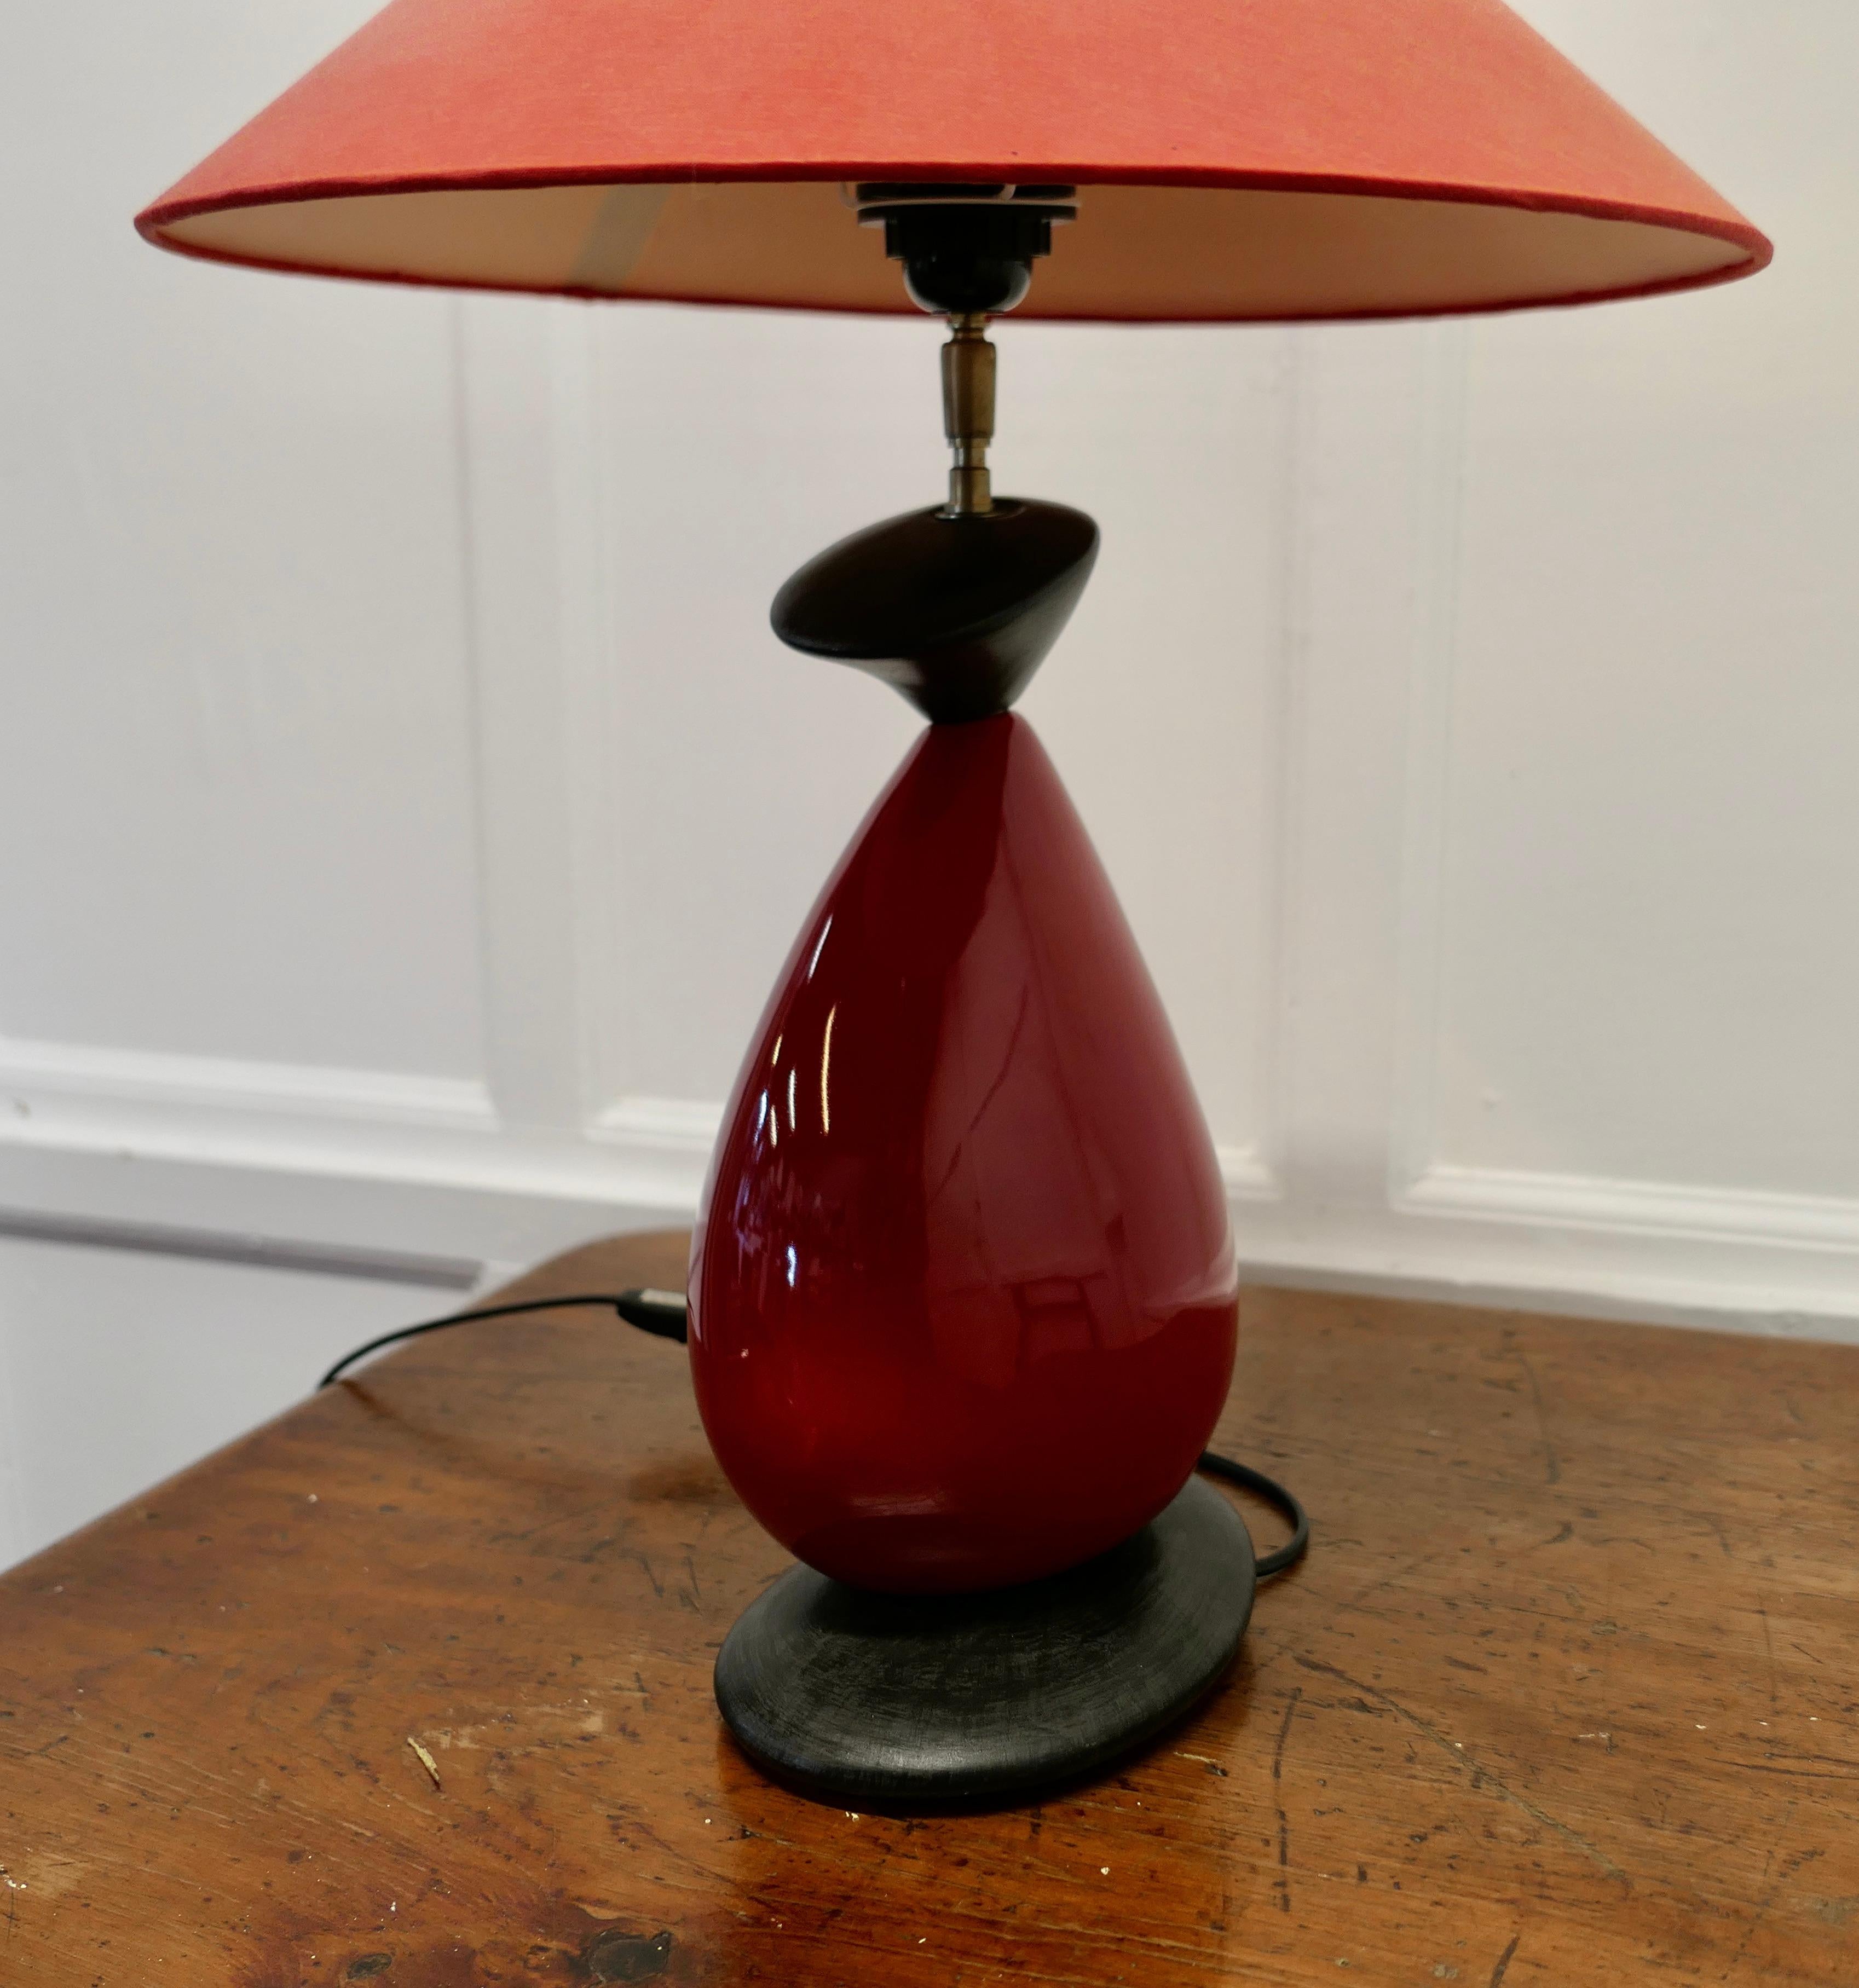 Francois Chatain Pebble Lamp from France

A Charming piece in Dark red and Black with a Red Coolie Lampshade
All working and a great looker
The lamp is 20.5” tall, and 16” in diameter at the shade
TMS109.